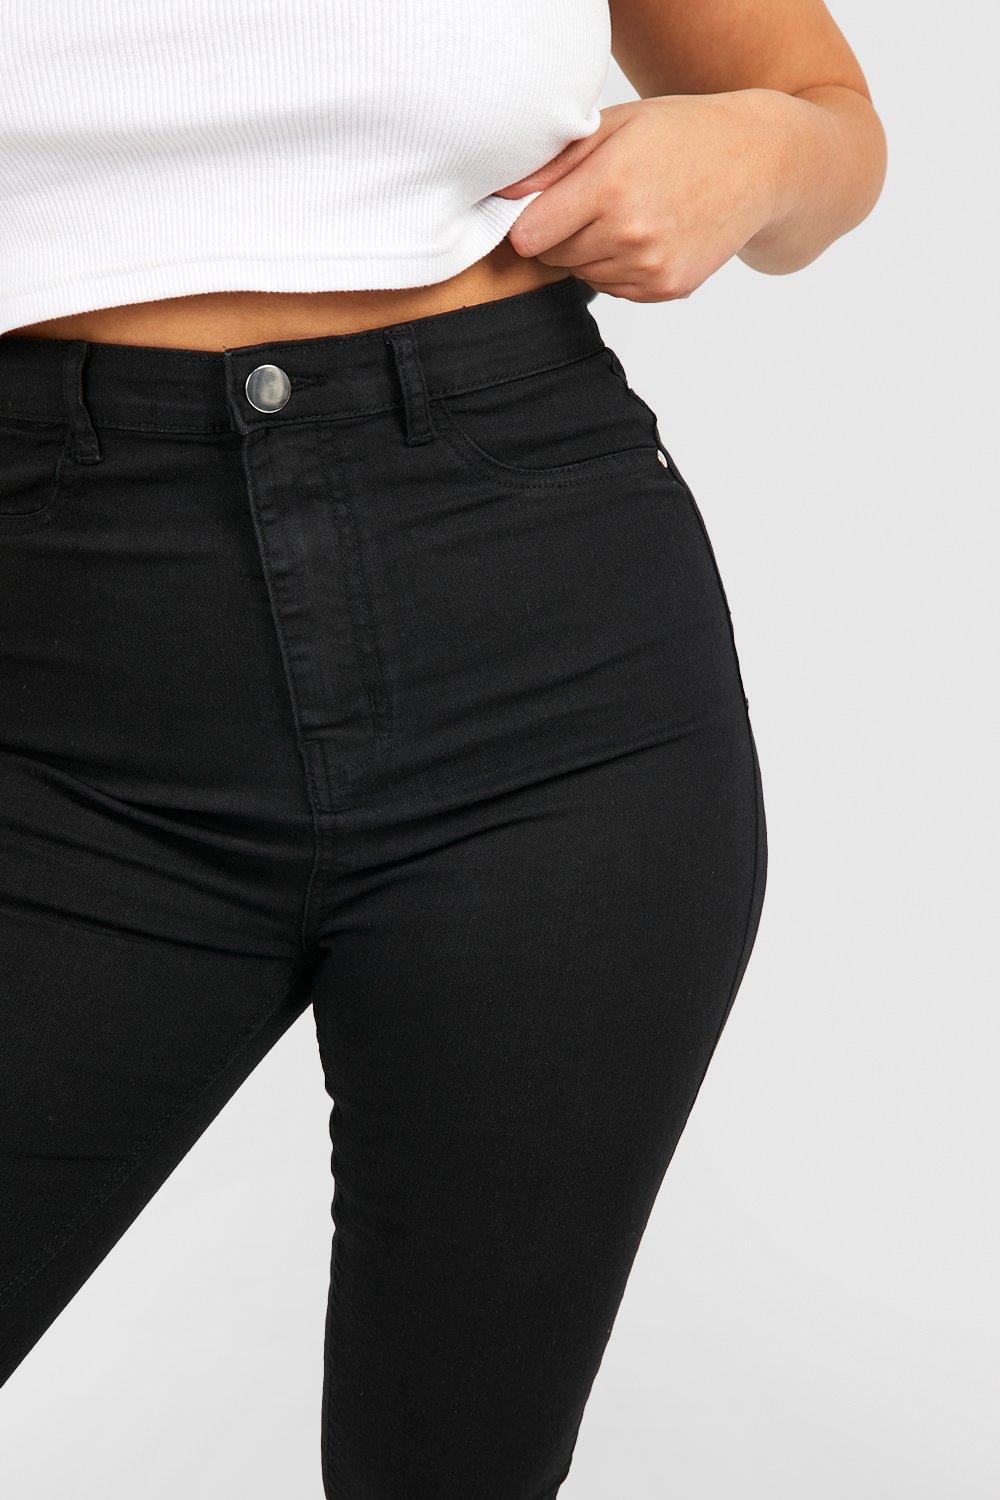 Umgee Jeggings - the BEST! Black, high waist, distressed with